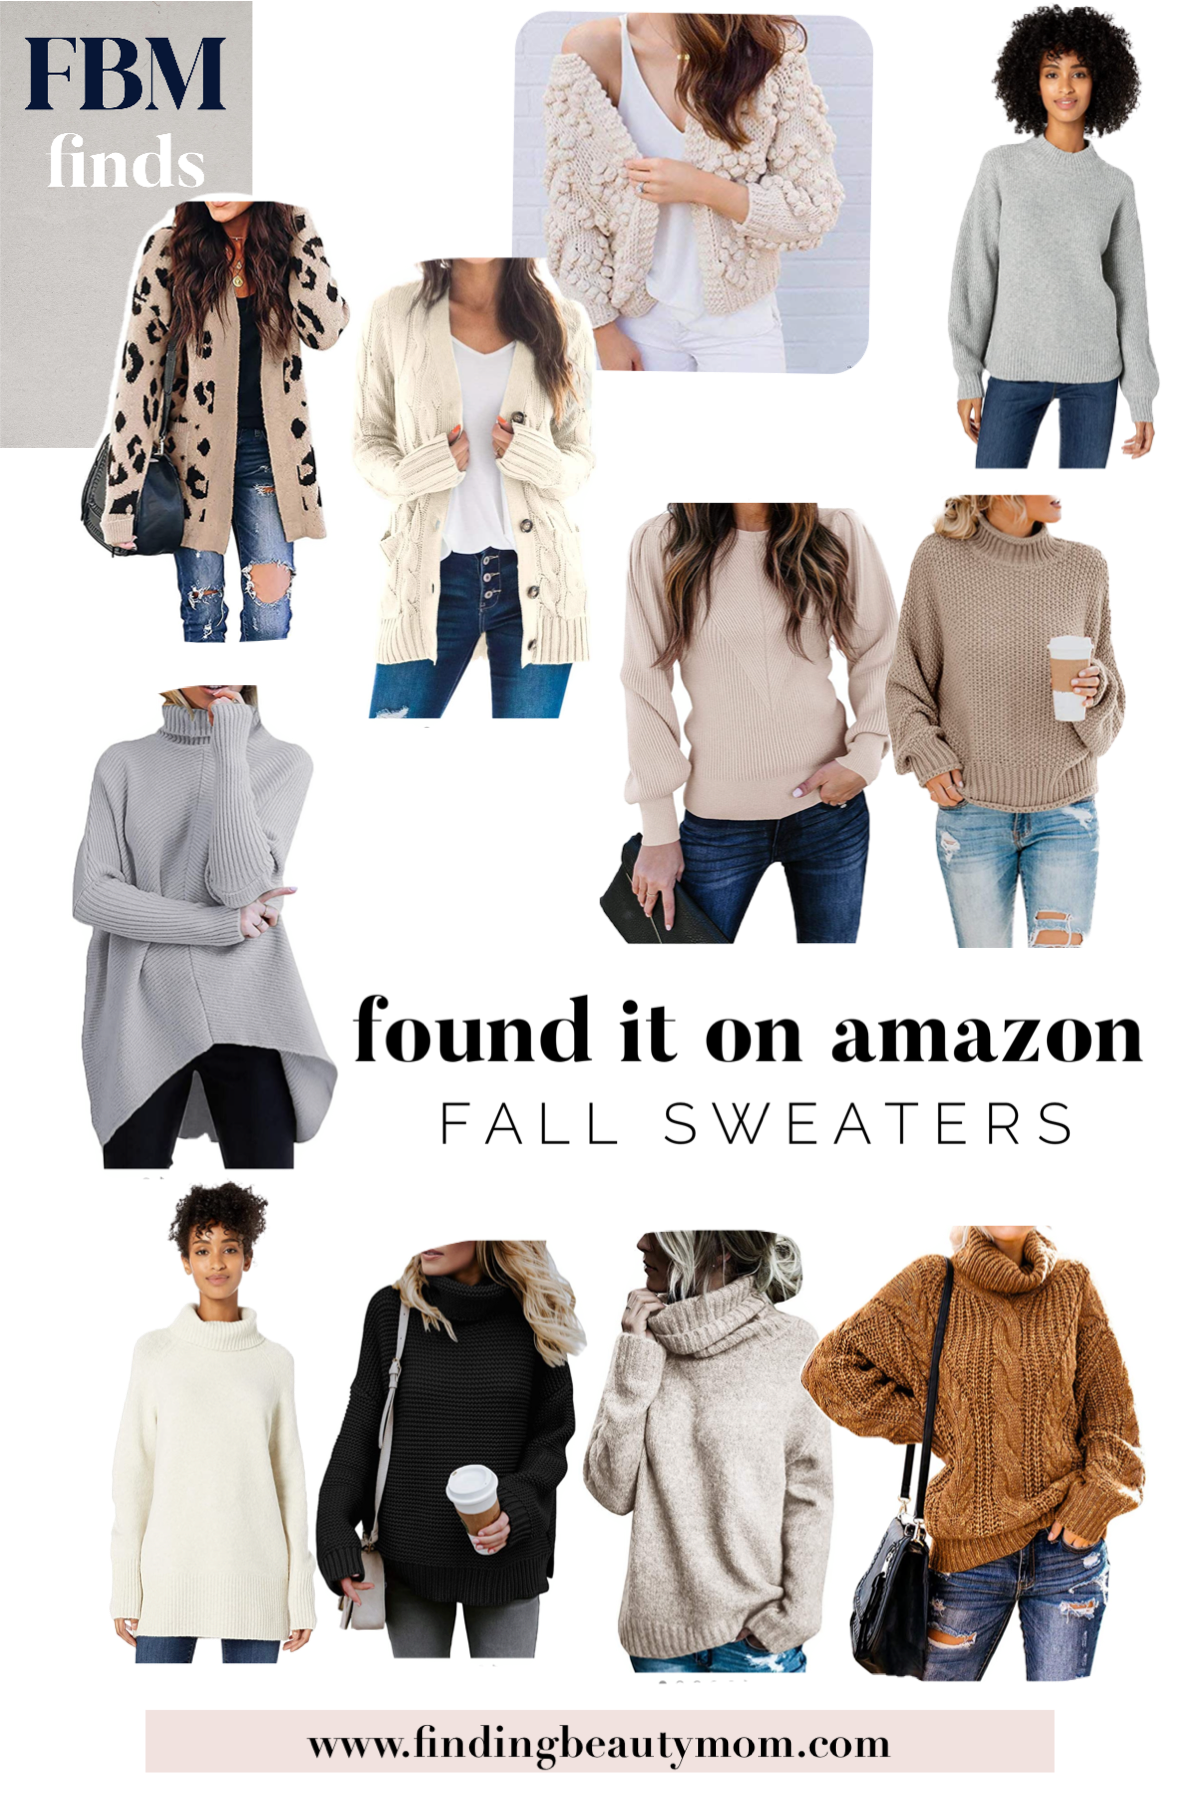 Amazon fall sweaters, best sweaters on Amazon, fall outfits from Amazon, finding beauty mom amazon sweaters 